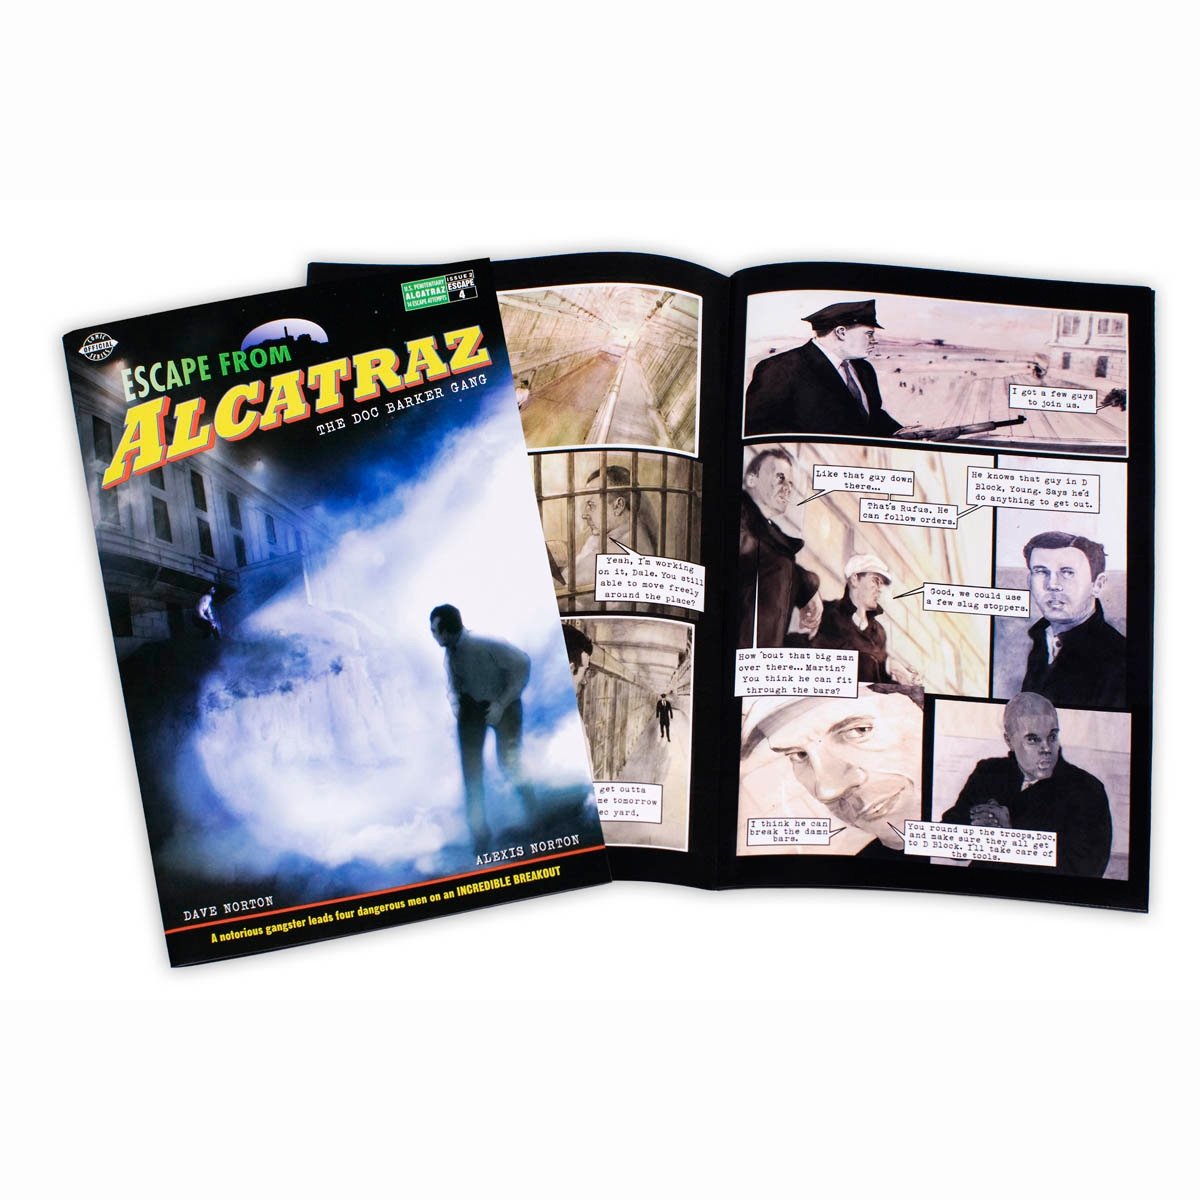 Escape from Alcatraz: The Doc Barker Gang comic book, story of infamous 1939 escape attempt.